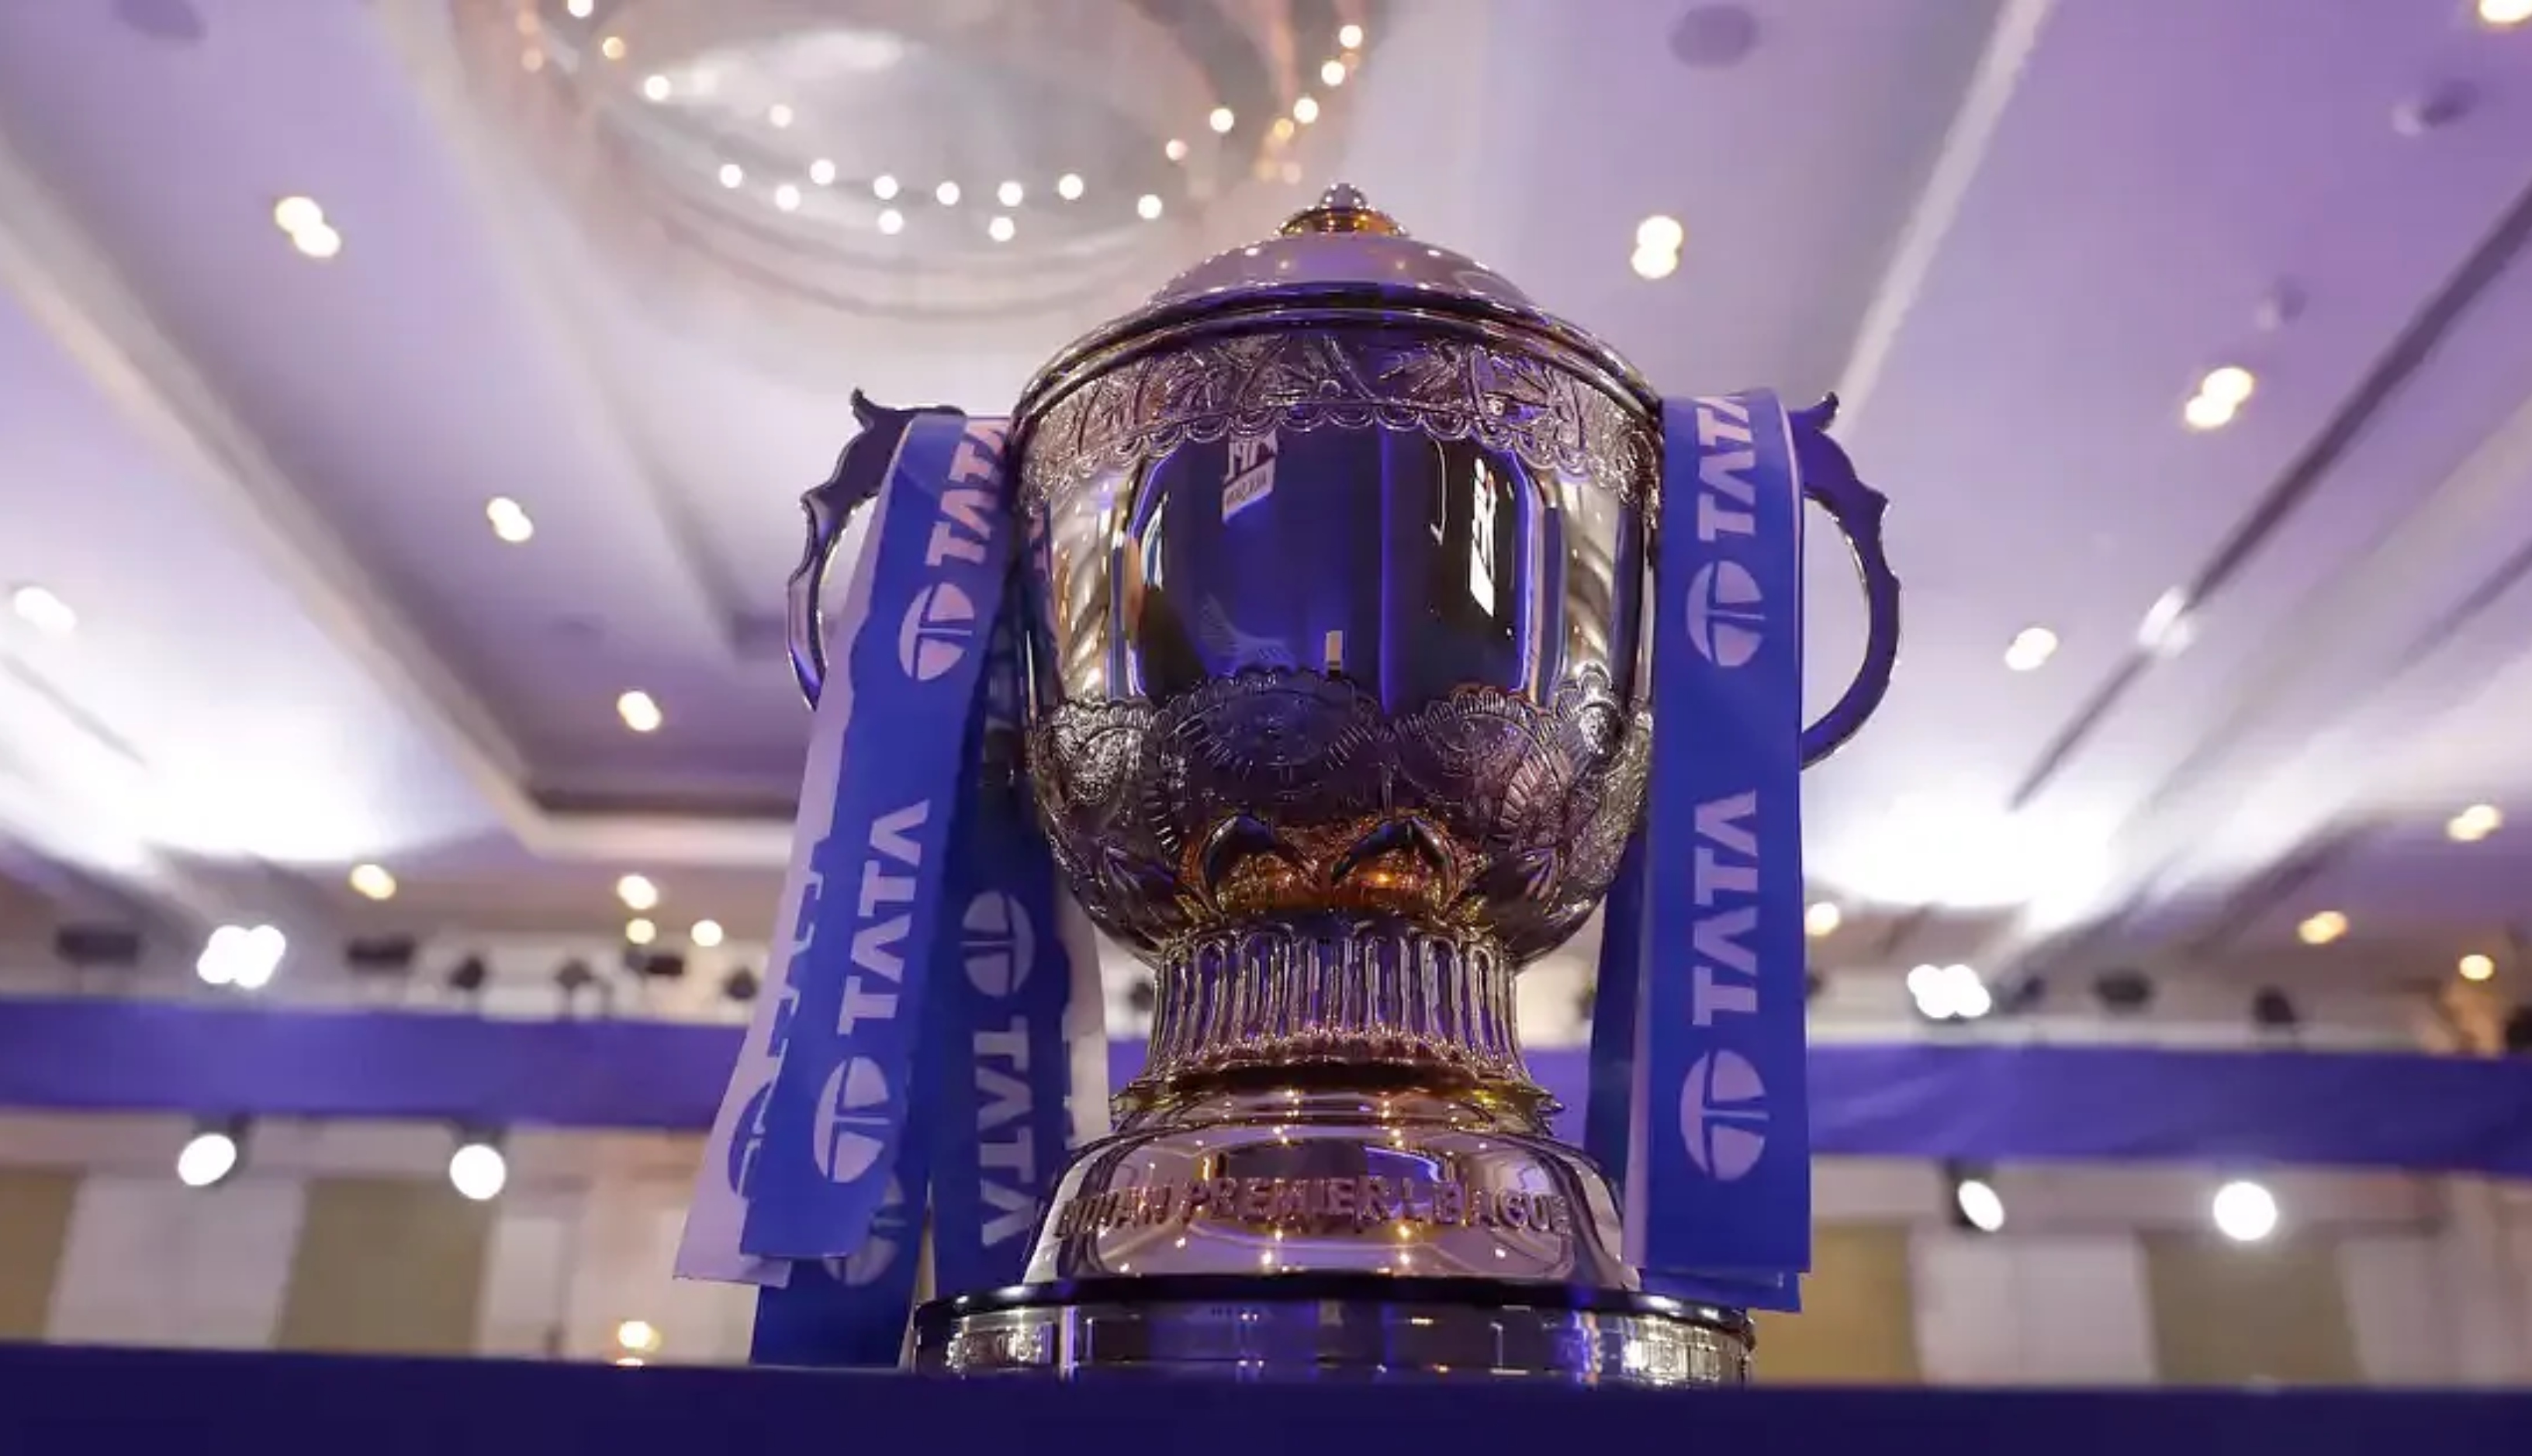 IPL 2022 will be played from March 26 to May 29 | BCCI/IPL